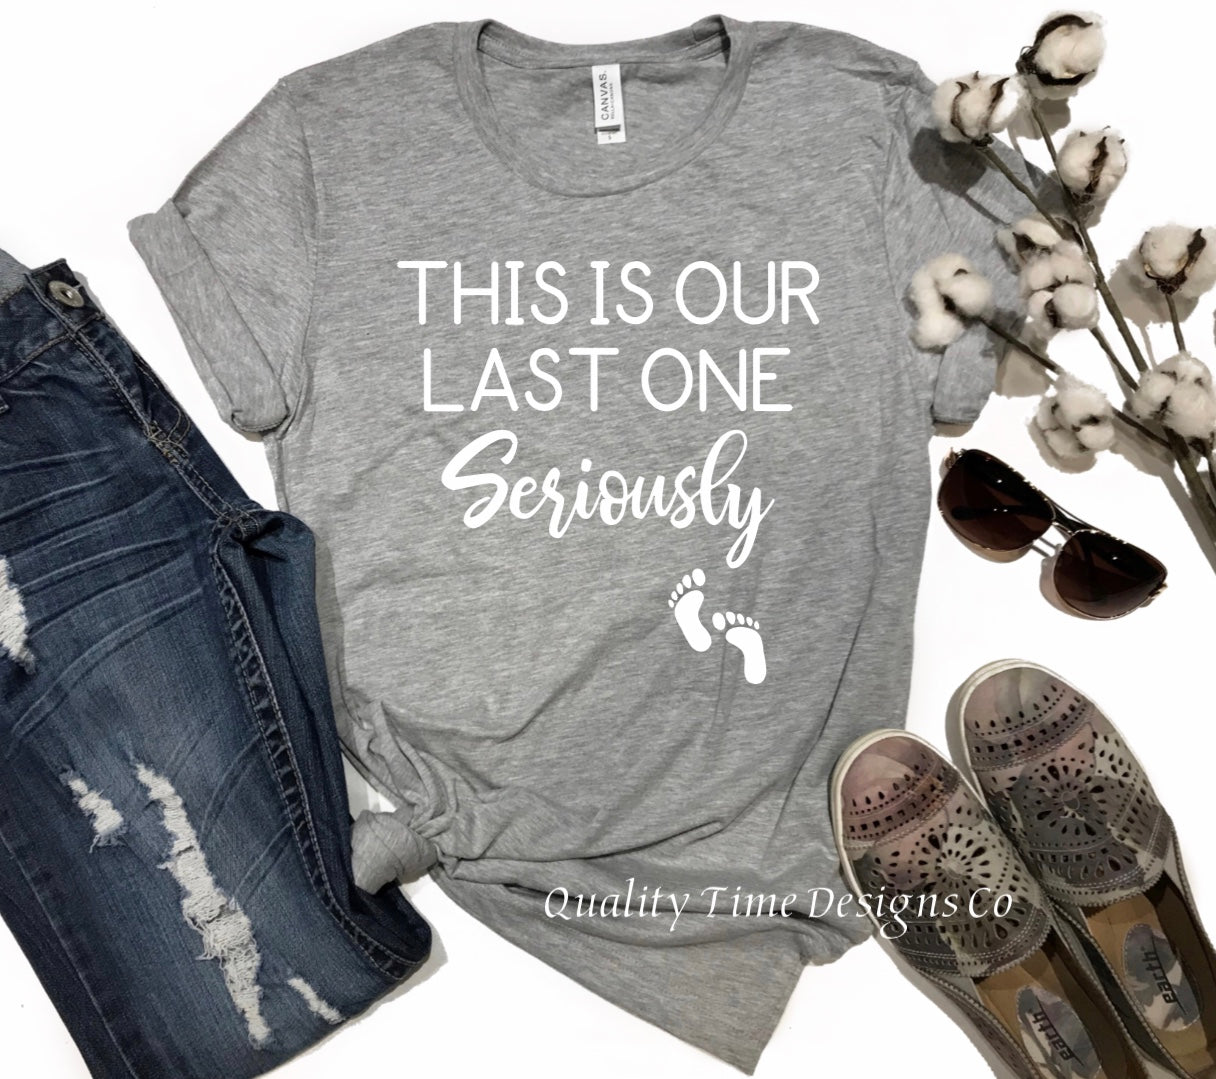 This is our last one seriously t shirt